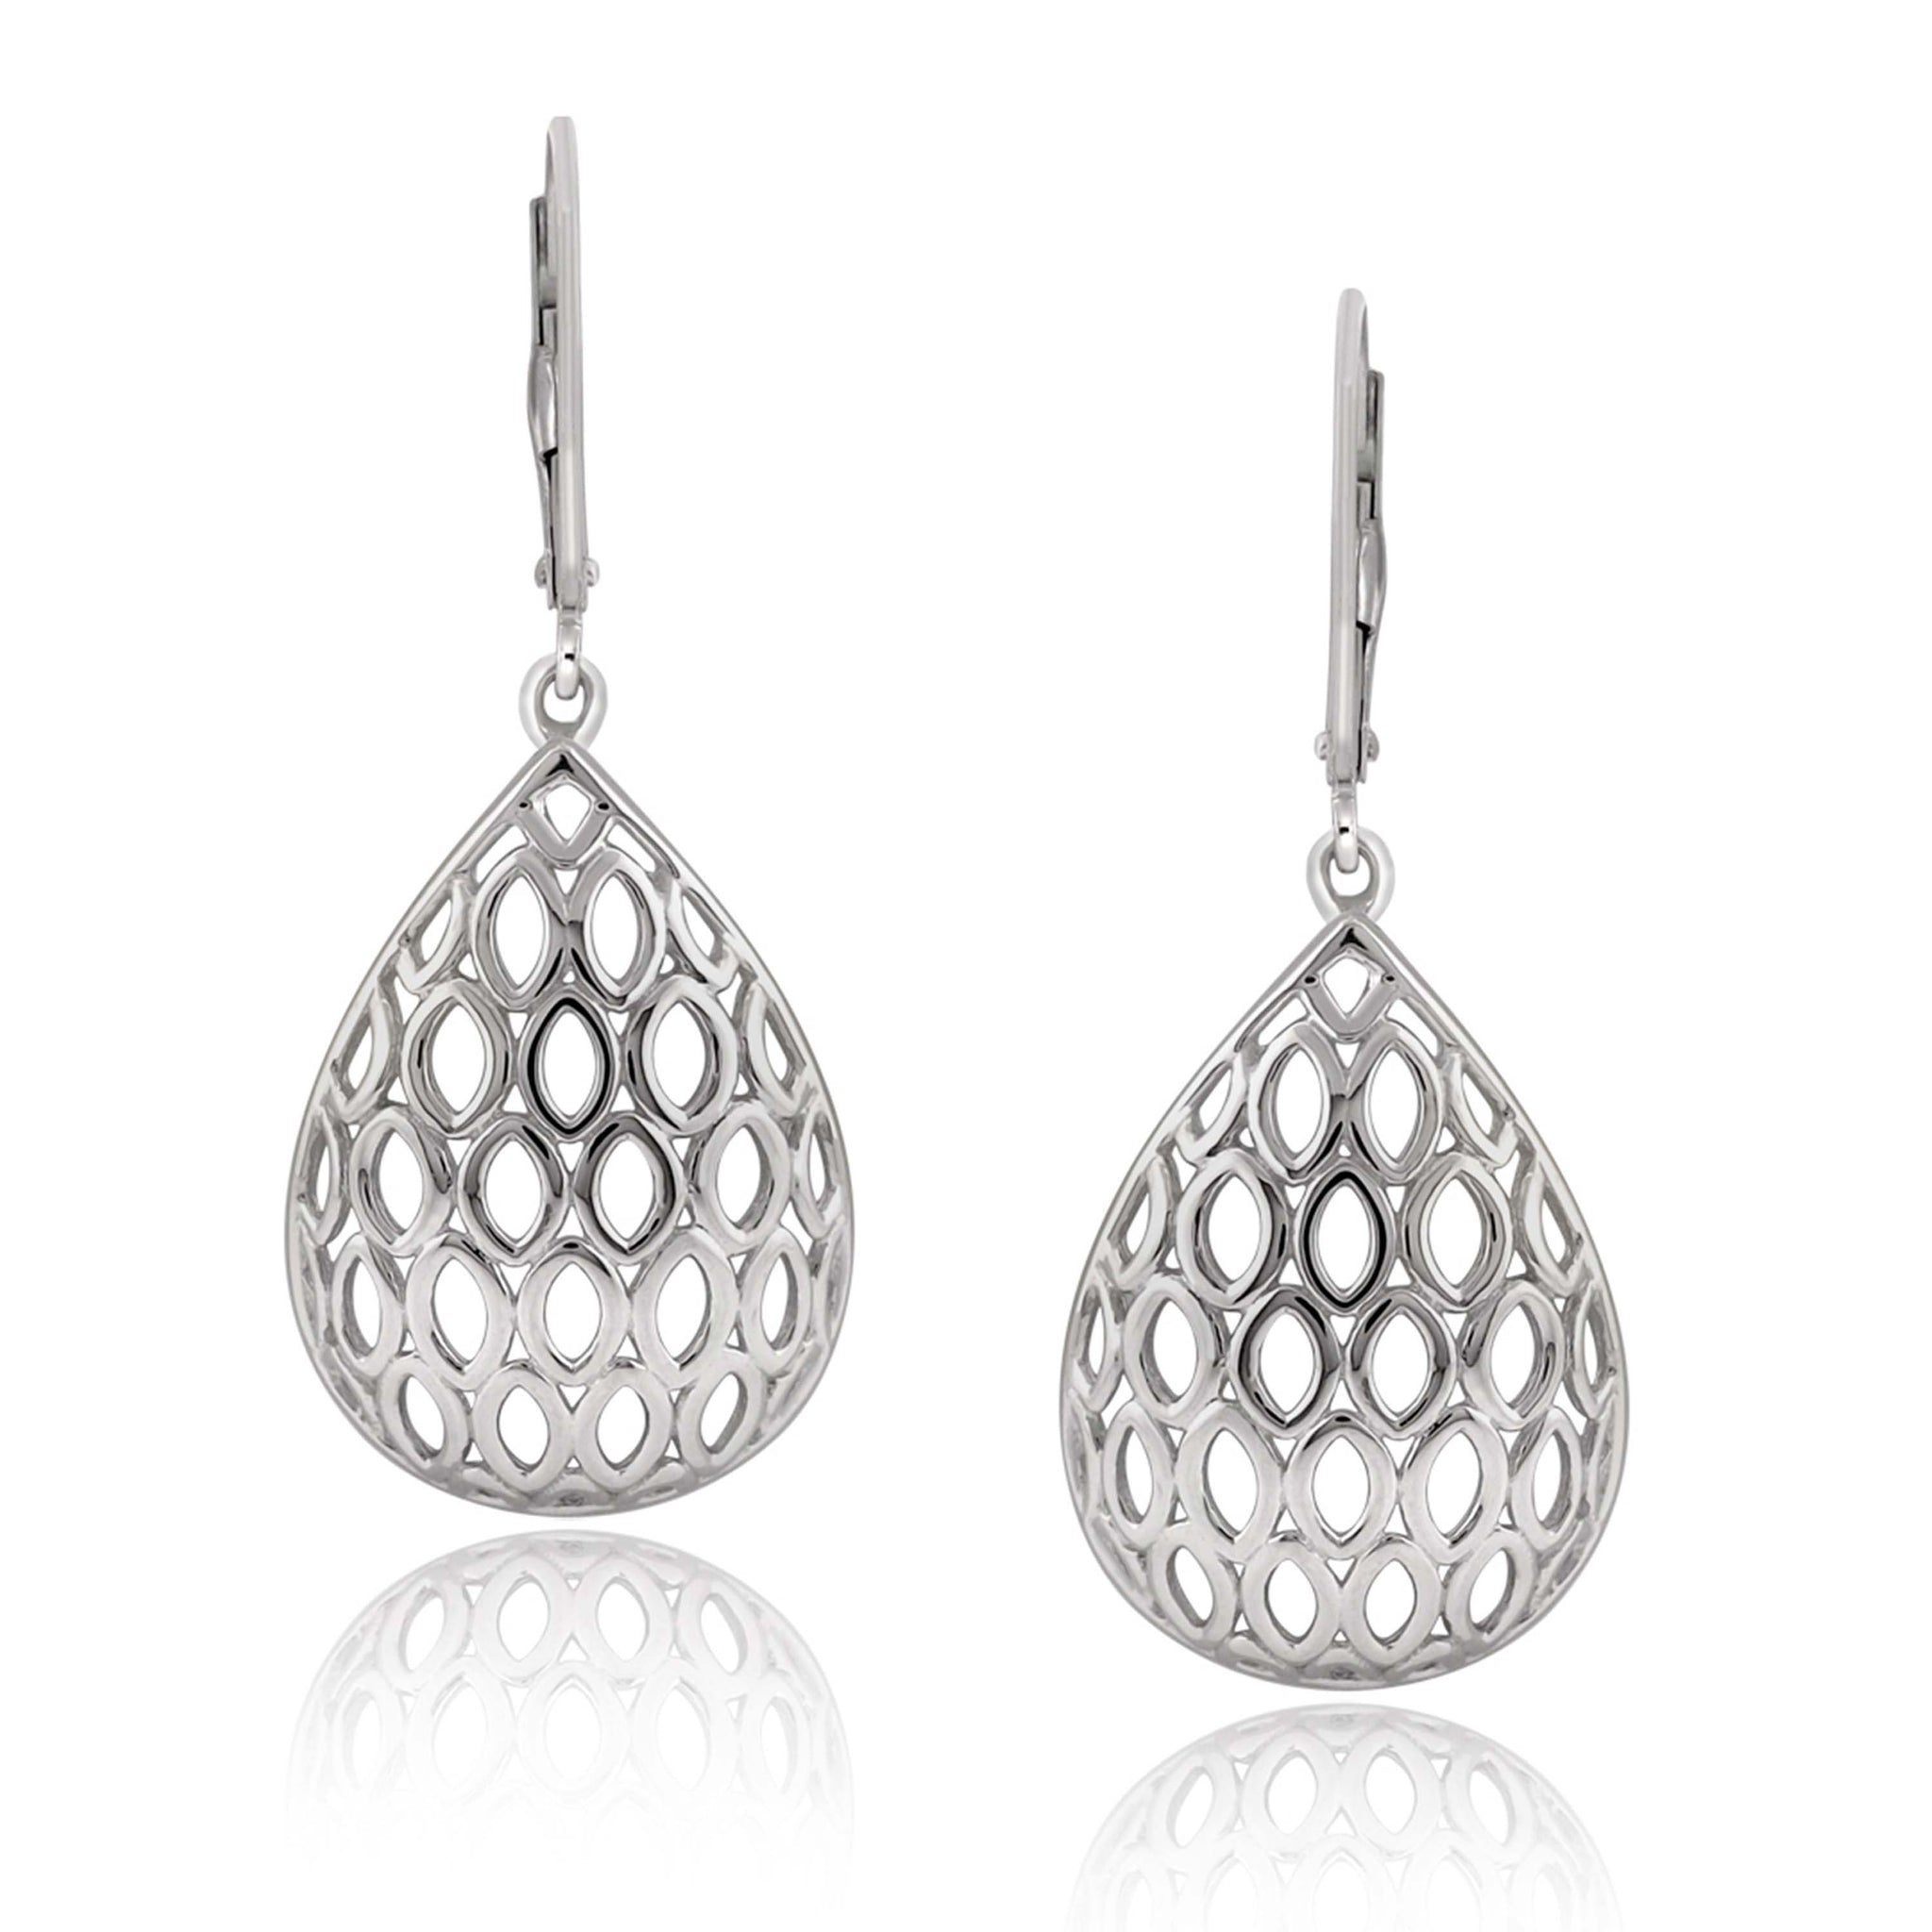 JewelonFire Sterling Silver Dangle Earrings - Assorted Colors